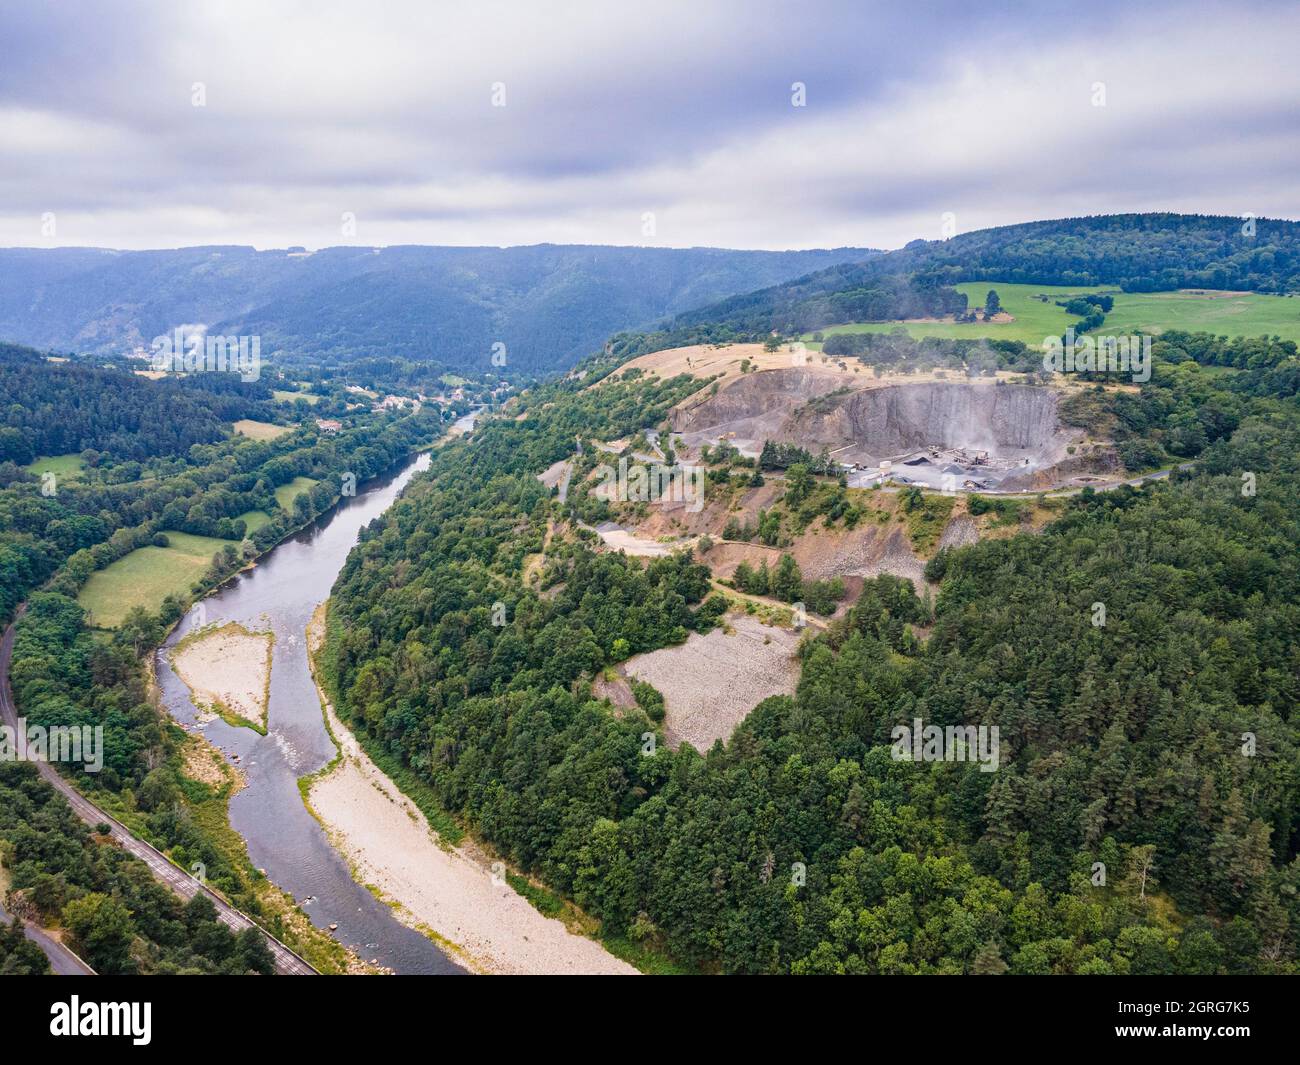 France Alleyras, basalt quarry, Allier valley (aerial view) (aerial view) Stock Photo